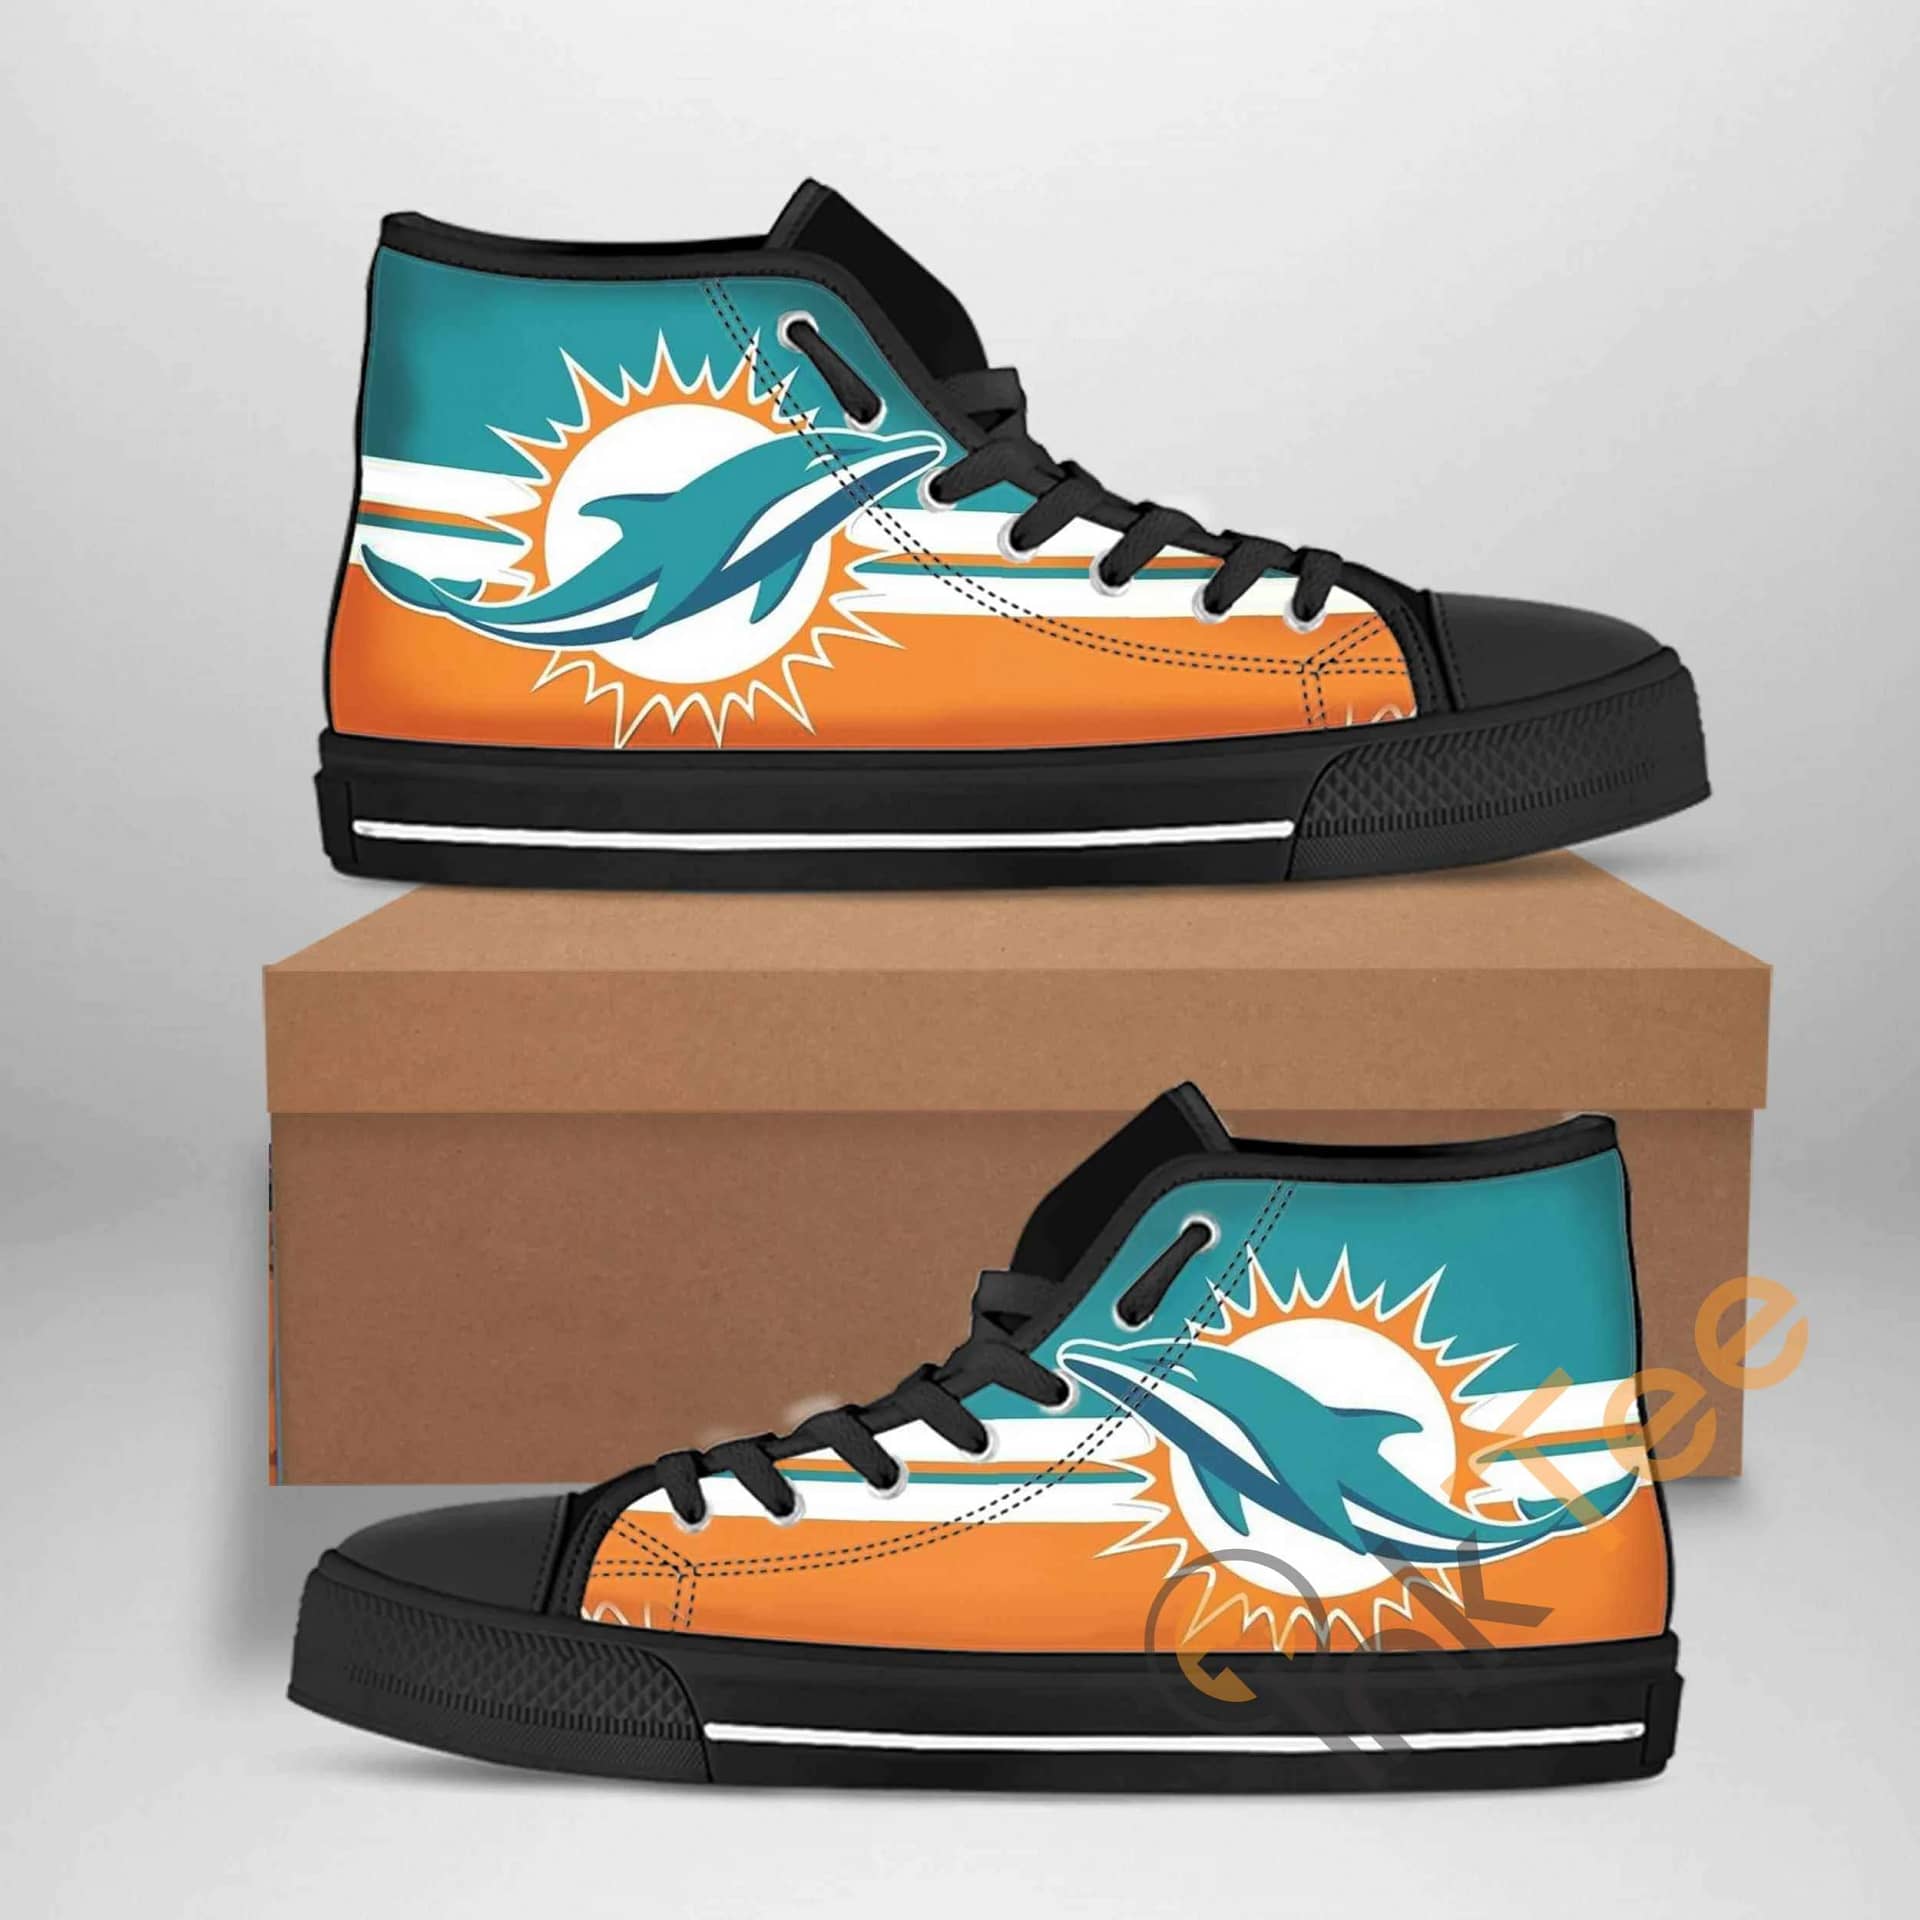 Miami Dolphins Nfl Football Amazon Best Seller Sku 1918 High Top Shoes